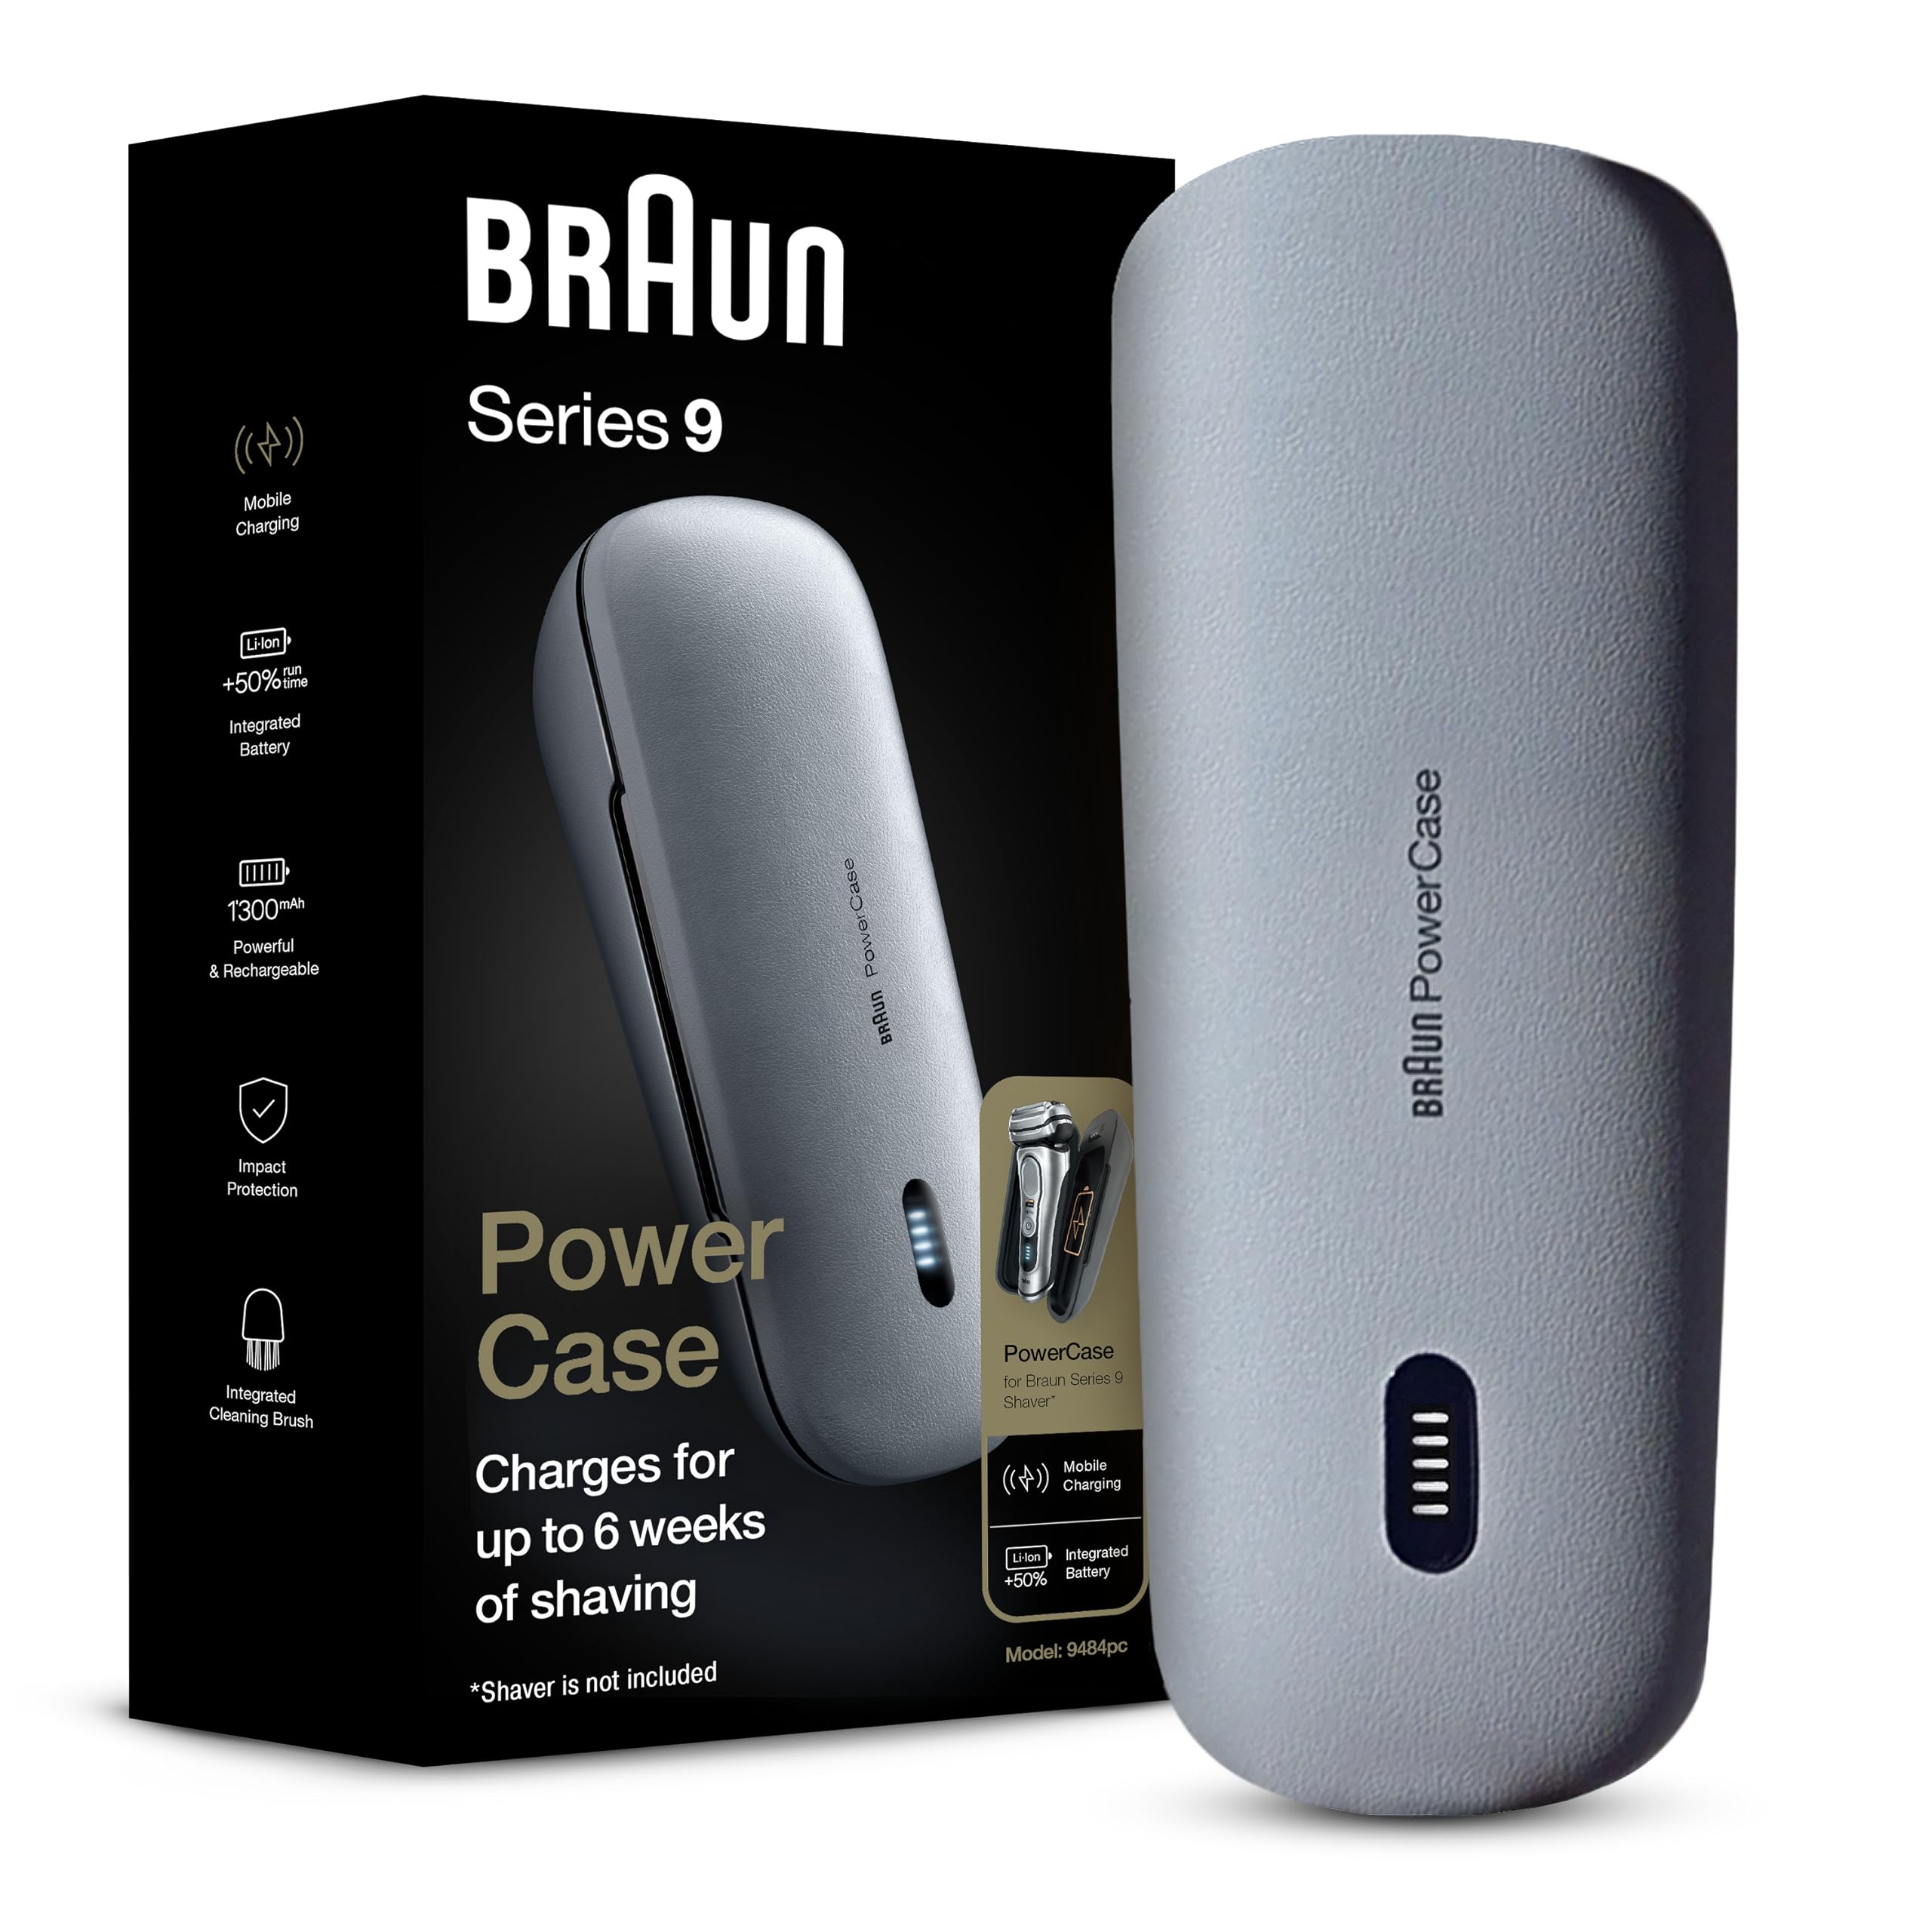 Braun Powercase for Electric Razors for Men, Compatible with Braun Series 9 Pro, Series 9 and Series 8 Electric Shavers, Portable Shaver Case, Charges for Up to 6 weeks